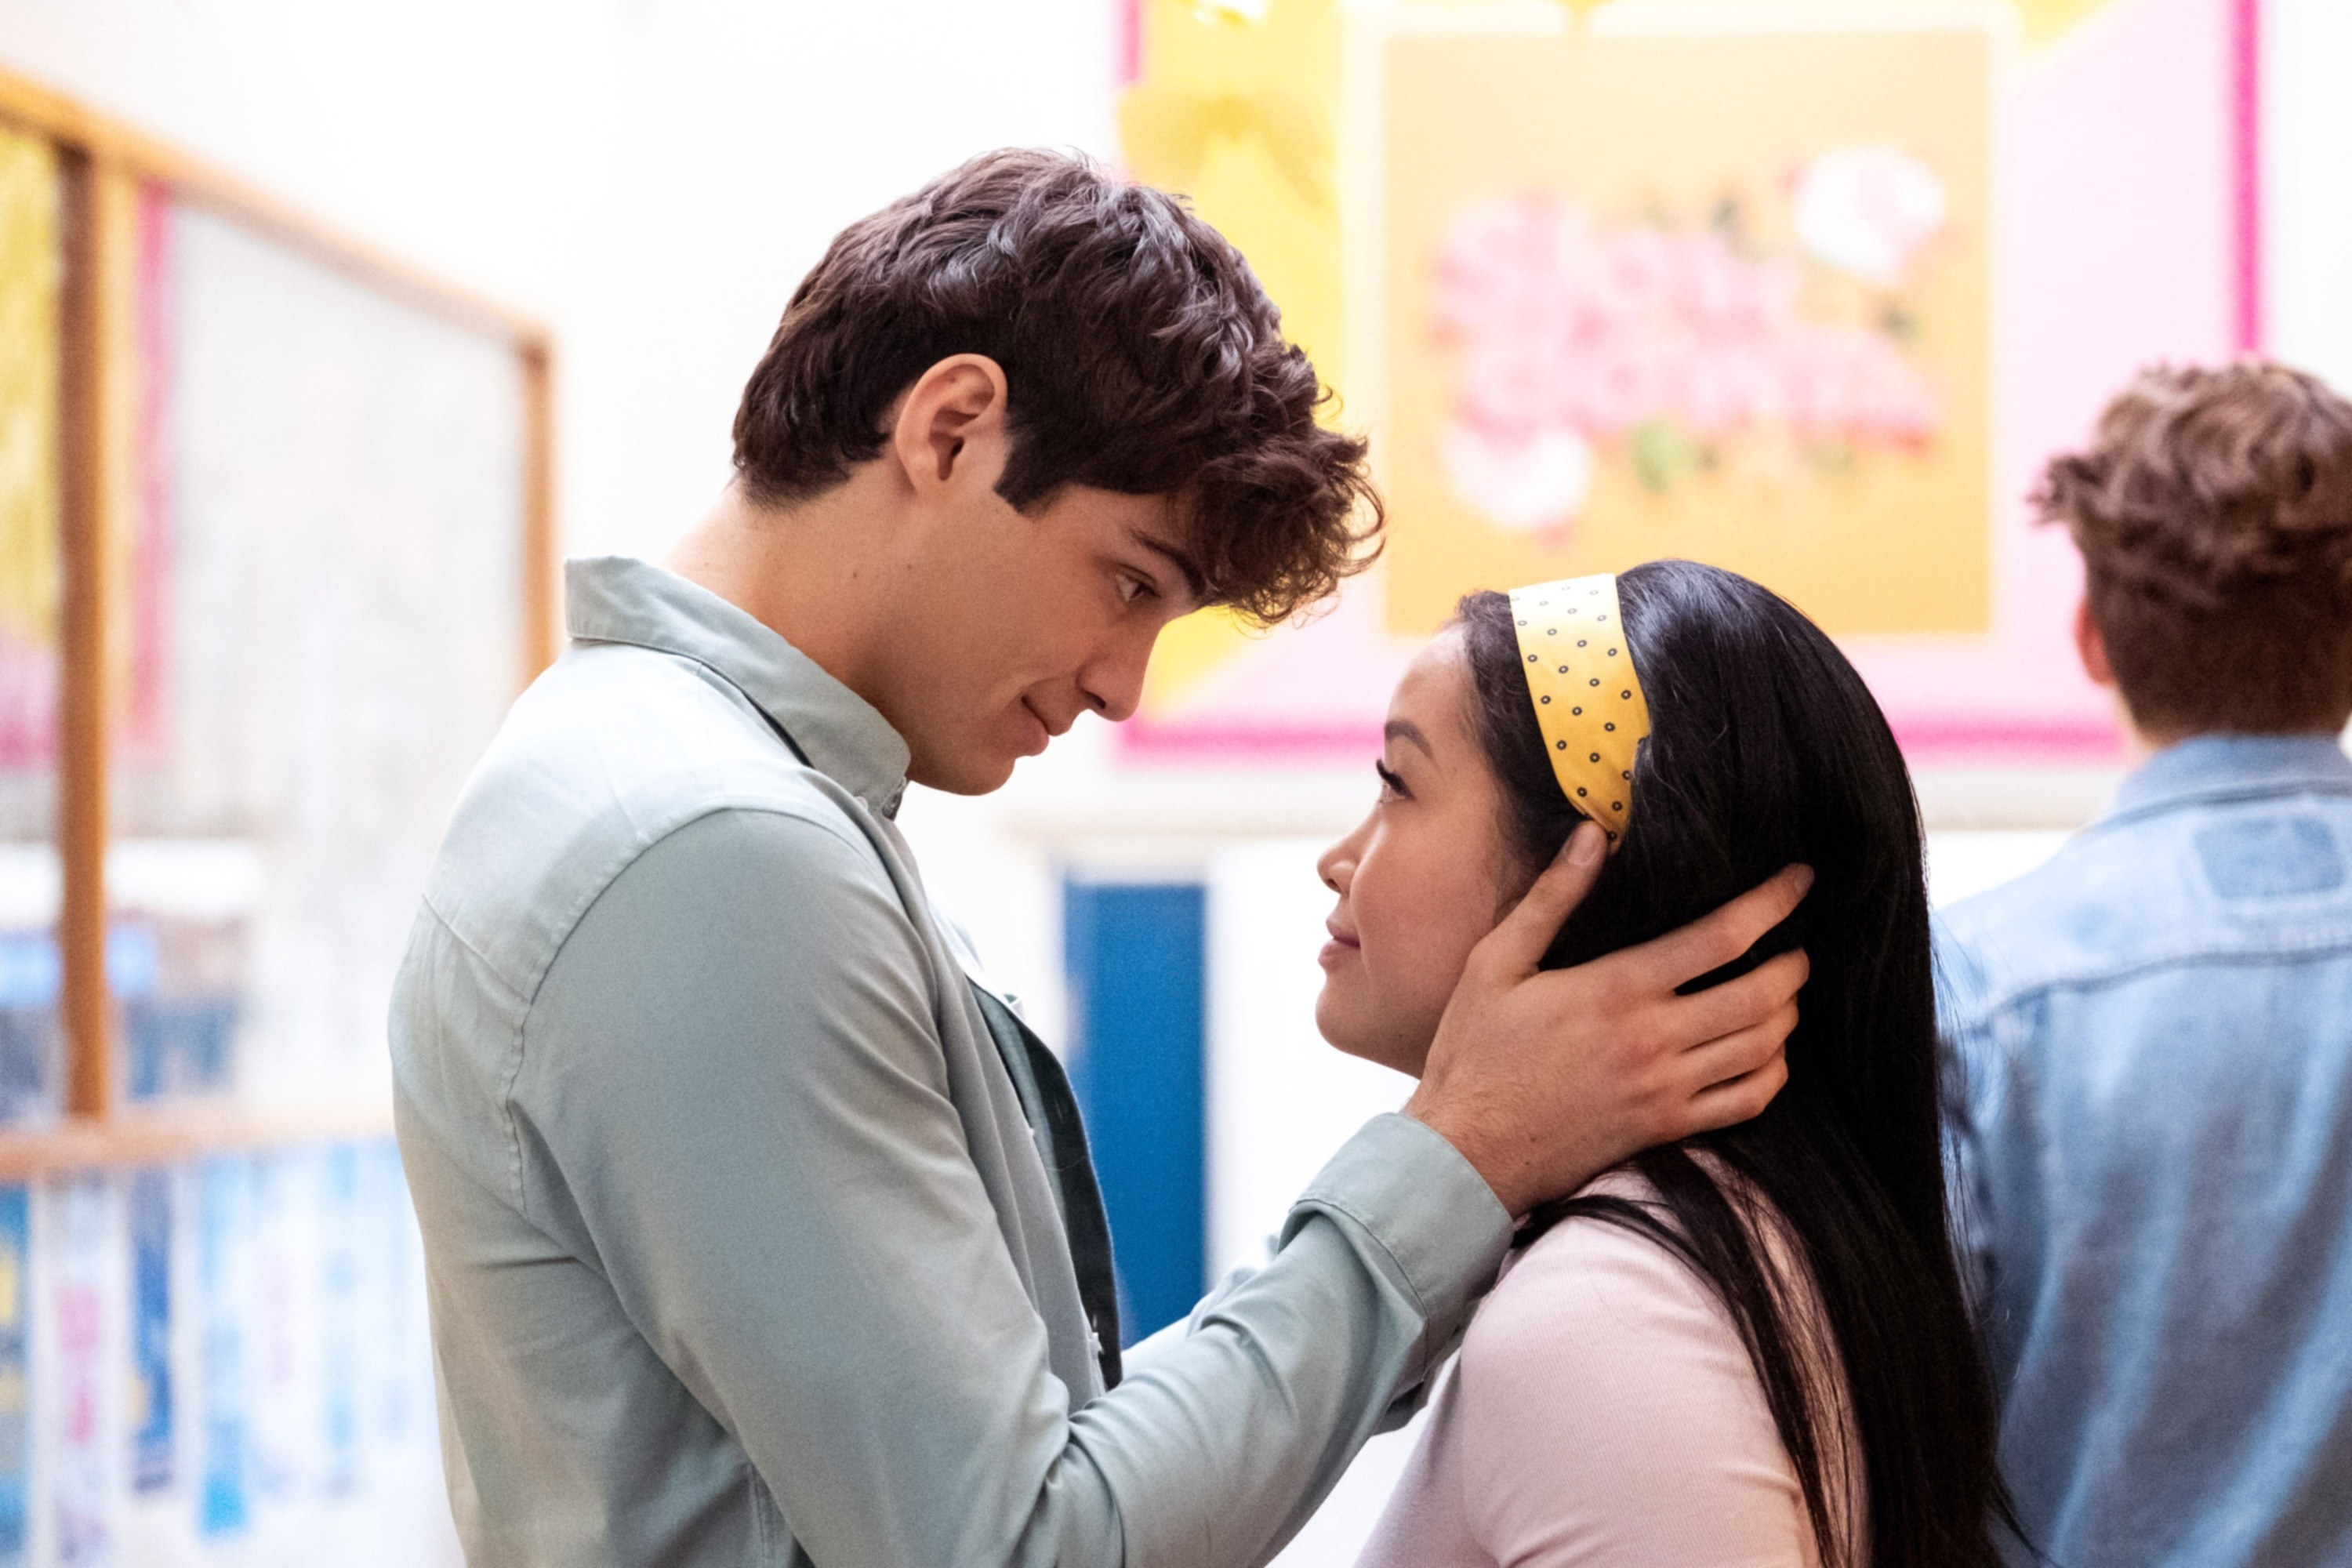 Noah Centineo and Lana Condor gaze at each other in To All the Boys: PS I Love You